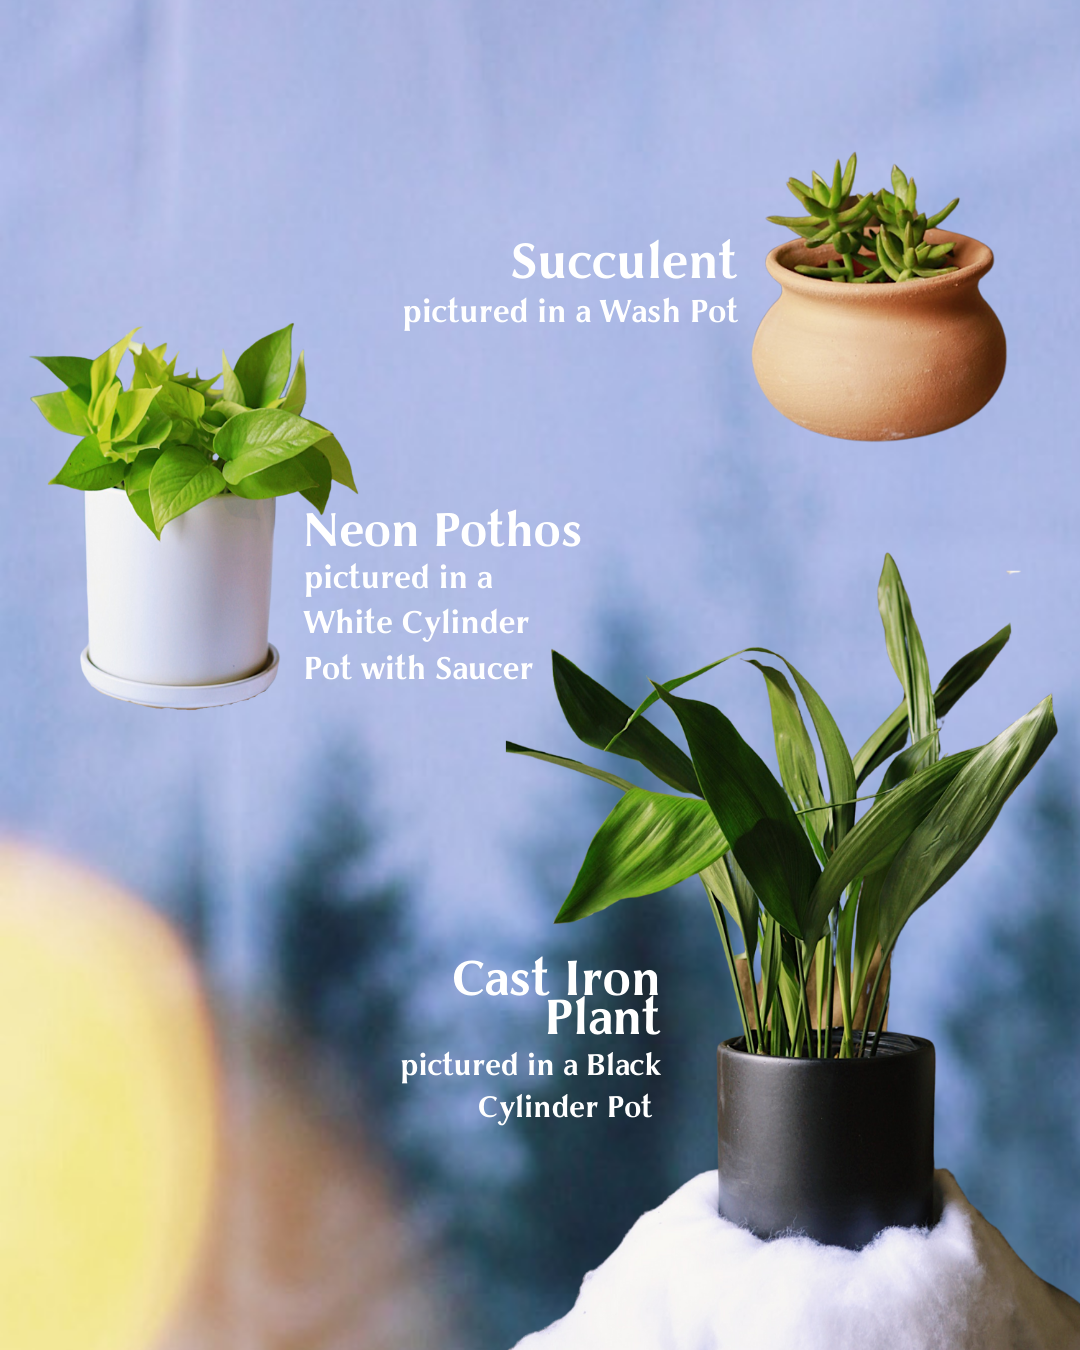 Your Exhaustive Gift Guide of Plants